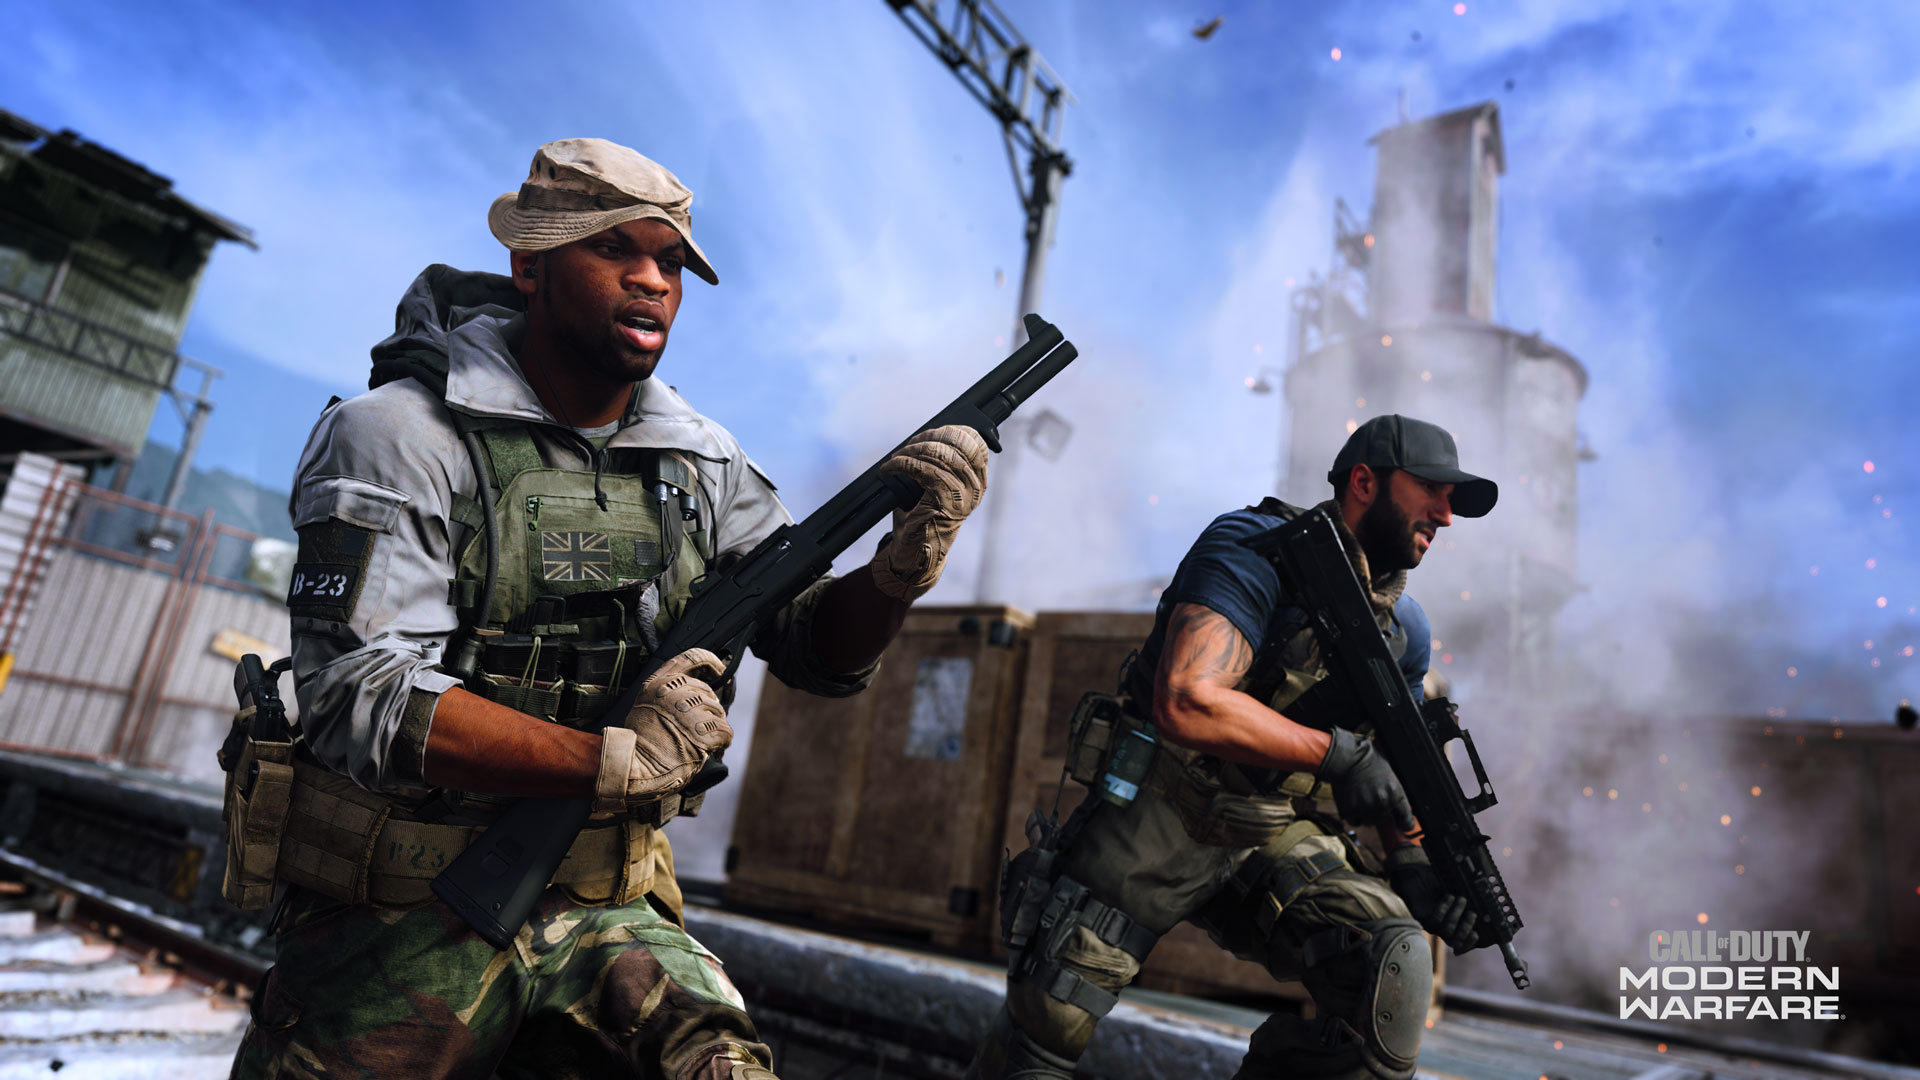 Call Of Duty: Modern Warfare PS4 Alpha Is Live Early For Everyone